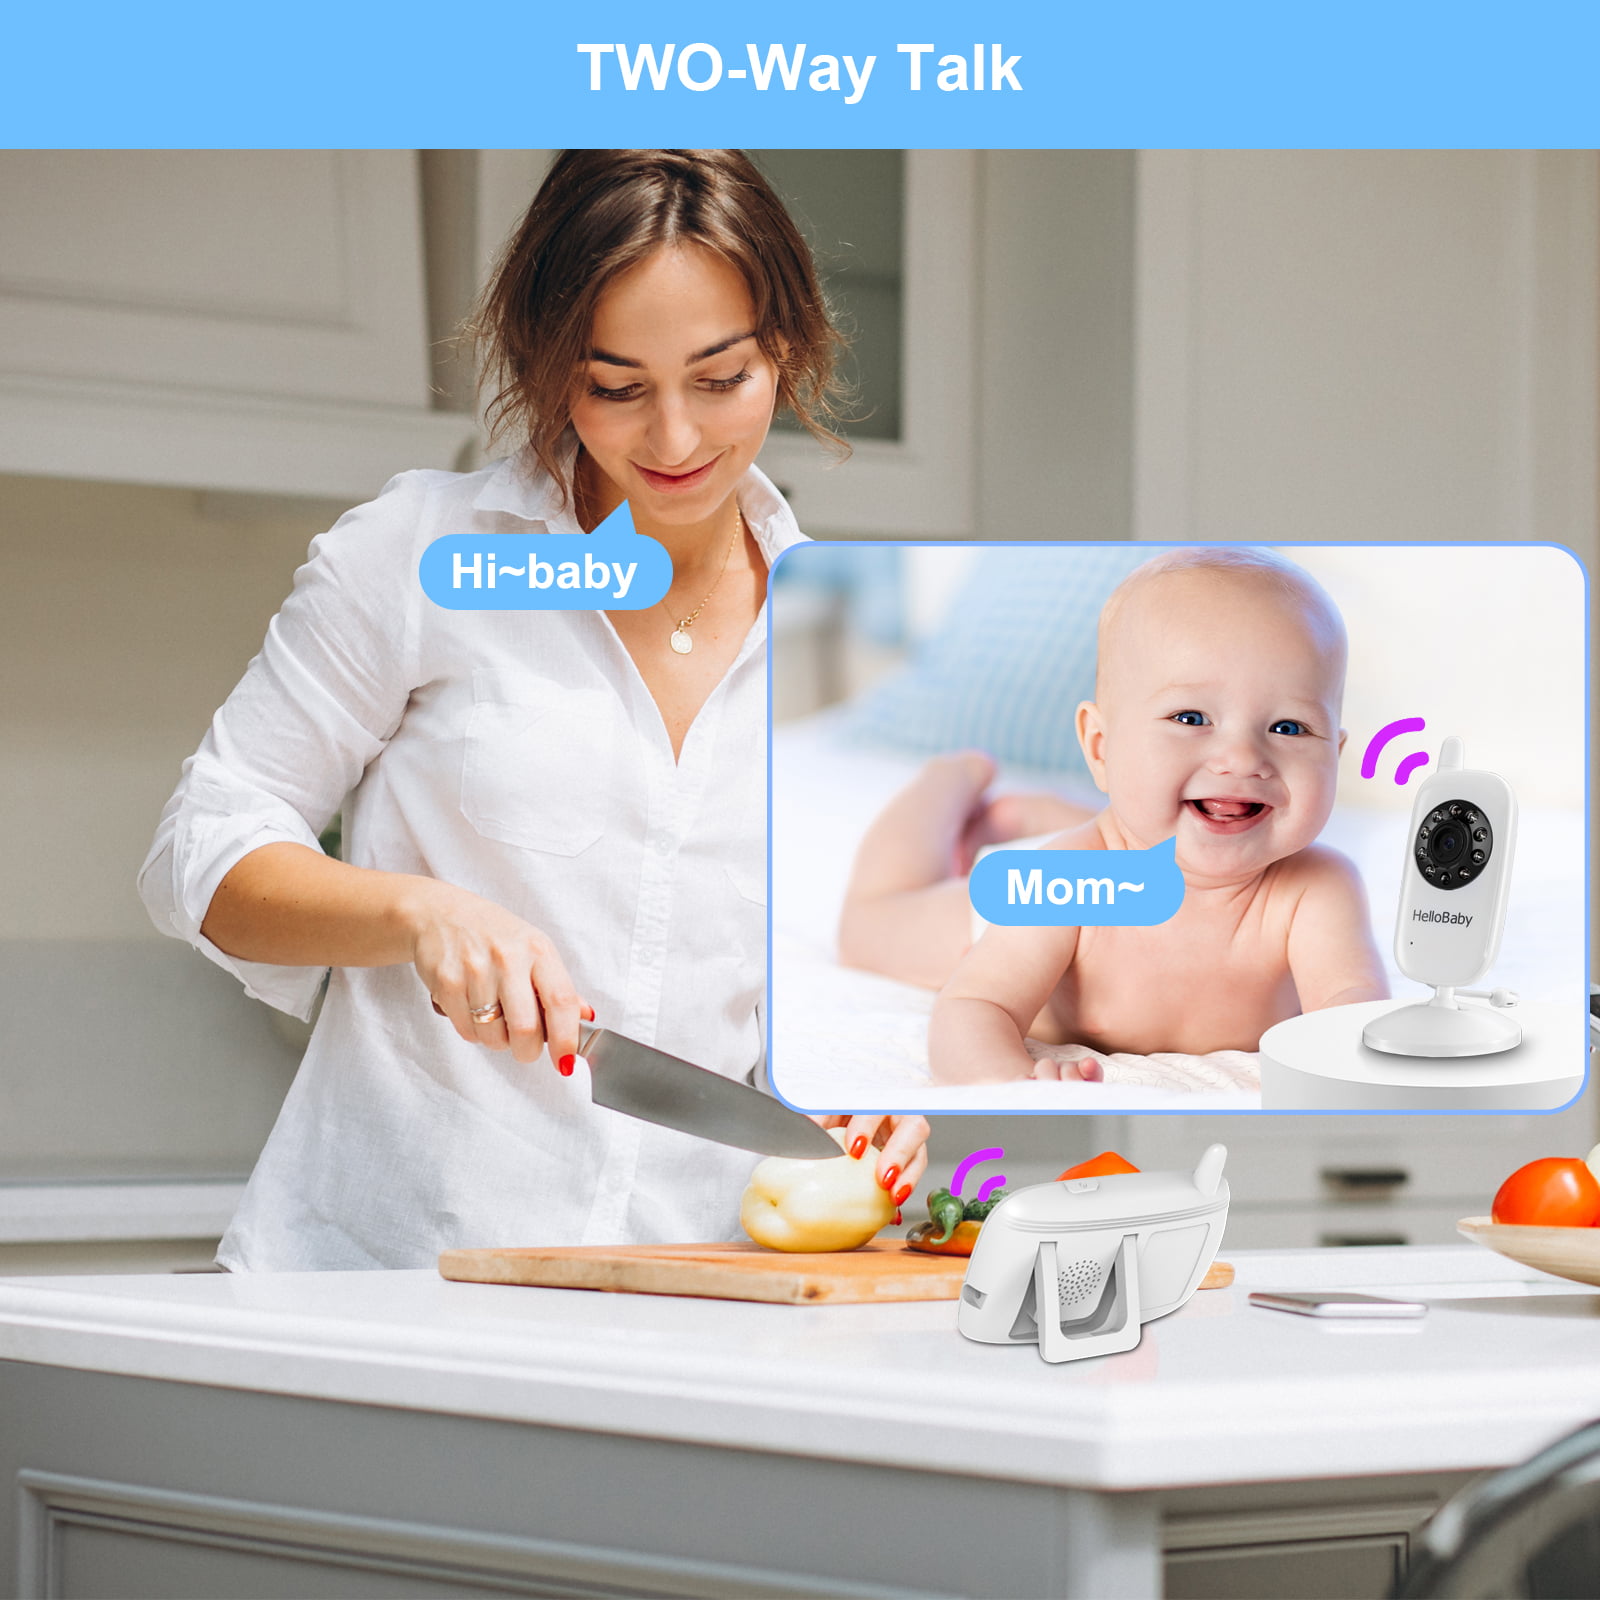 HelloBaby HB32 Video Baby Monitor Review: A Wallet-Friendly Way To Watch  Your Kids